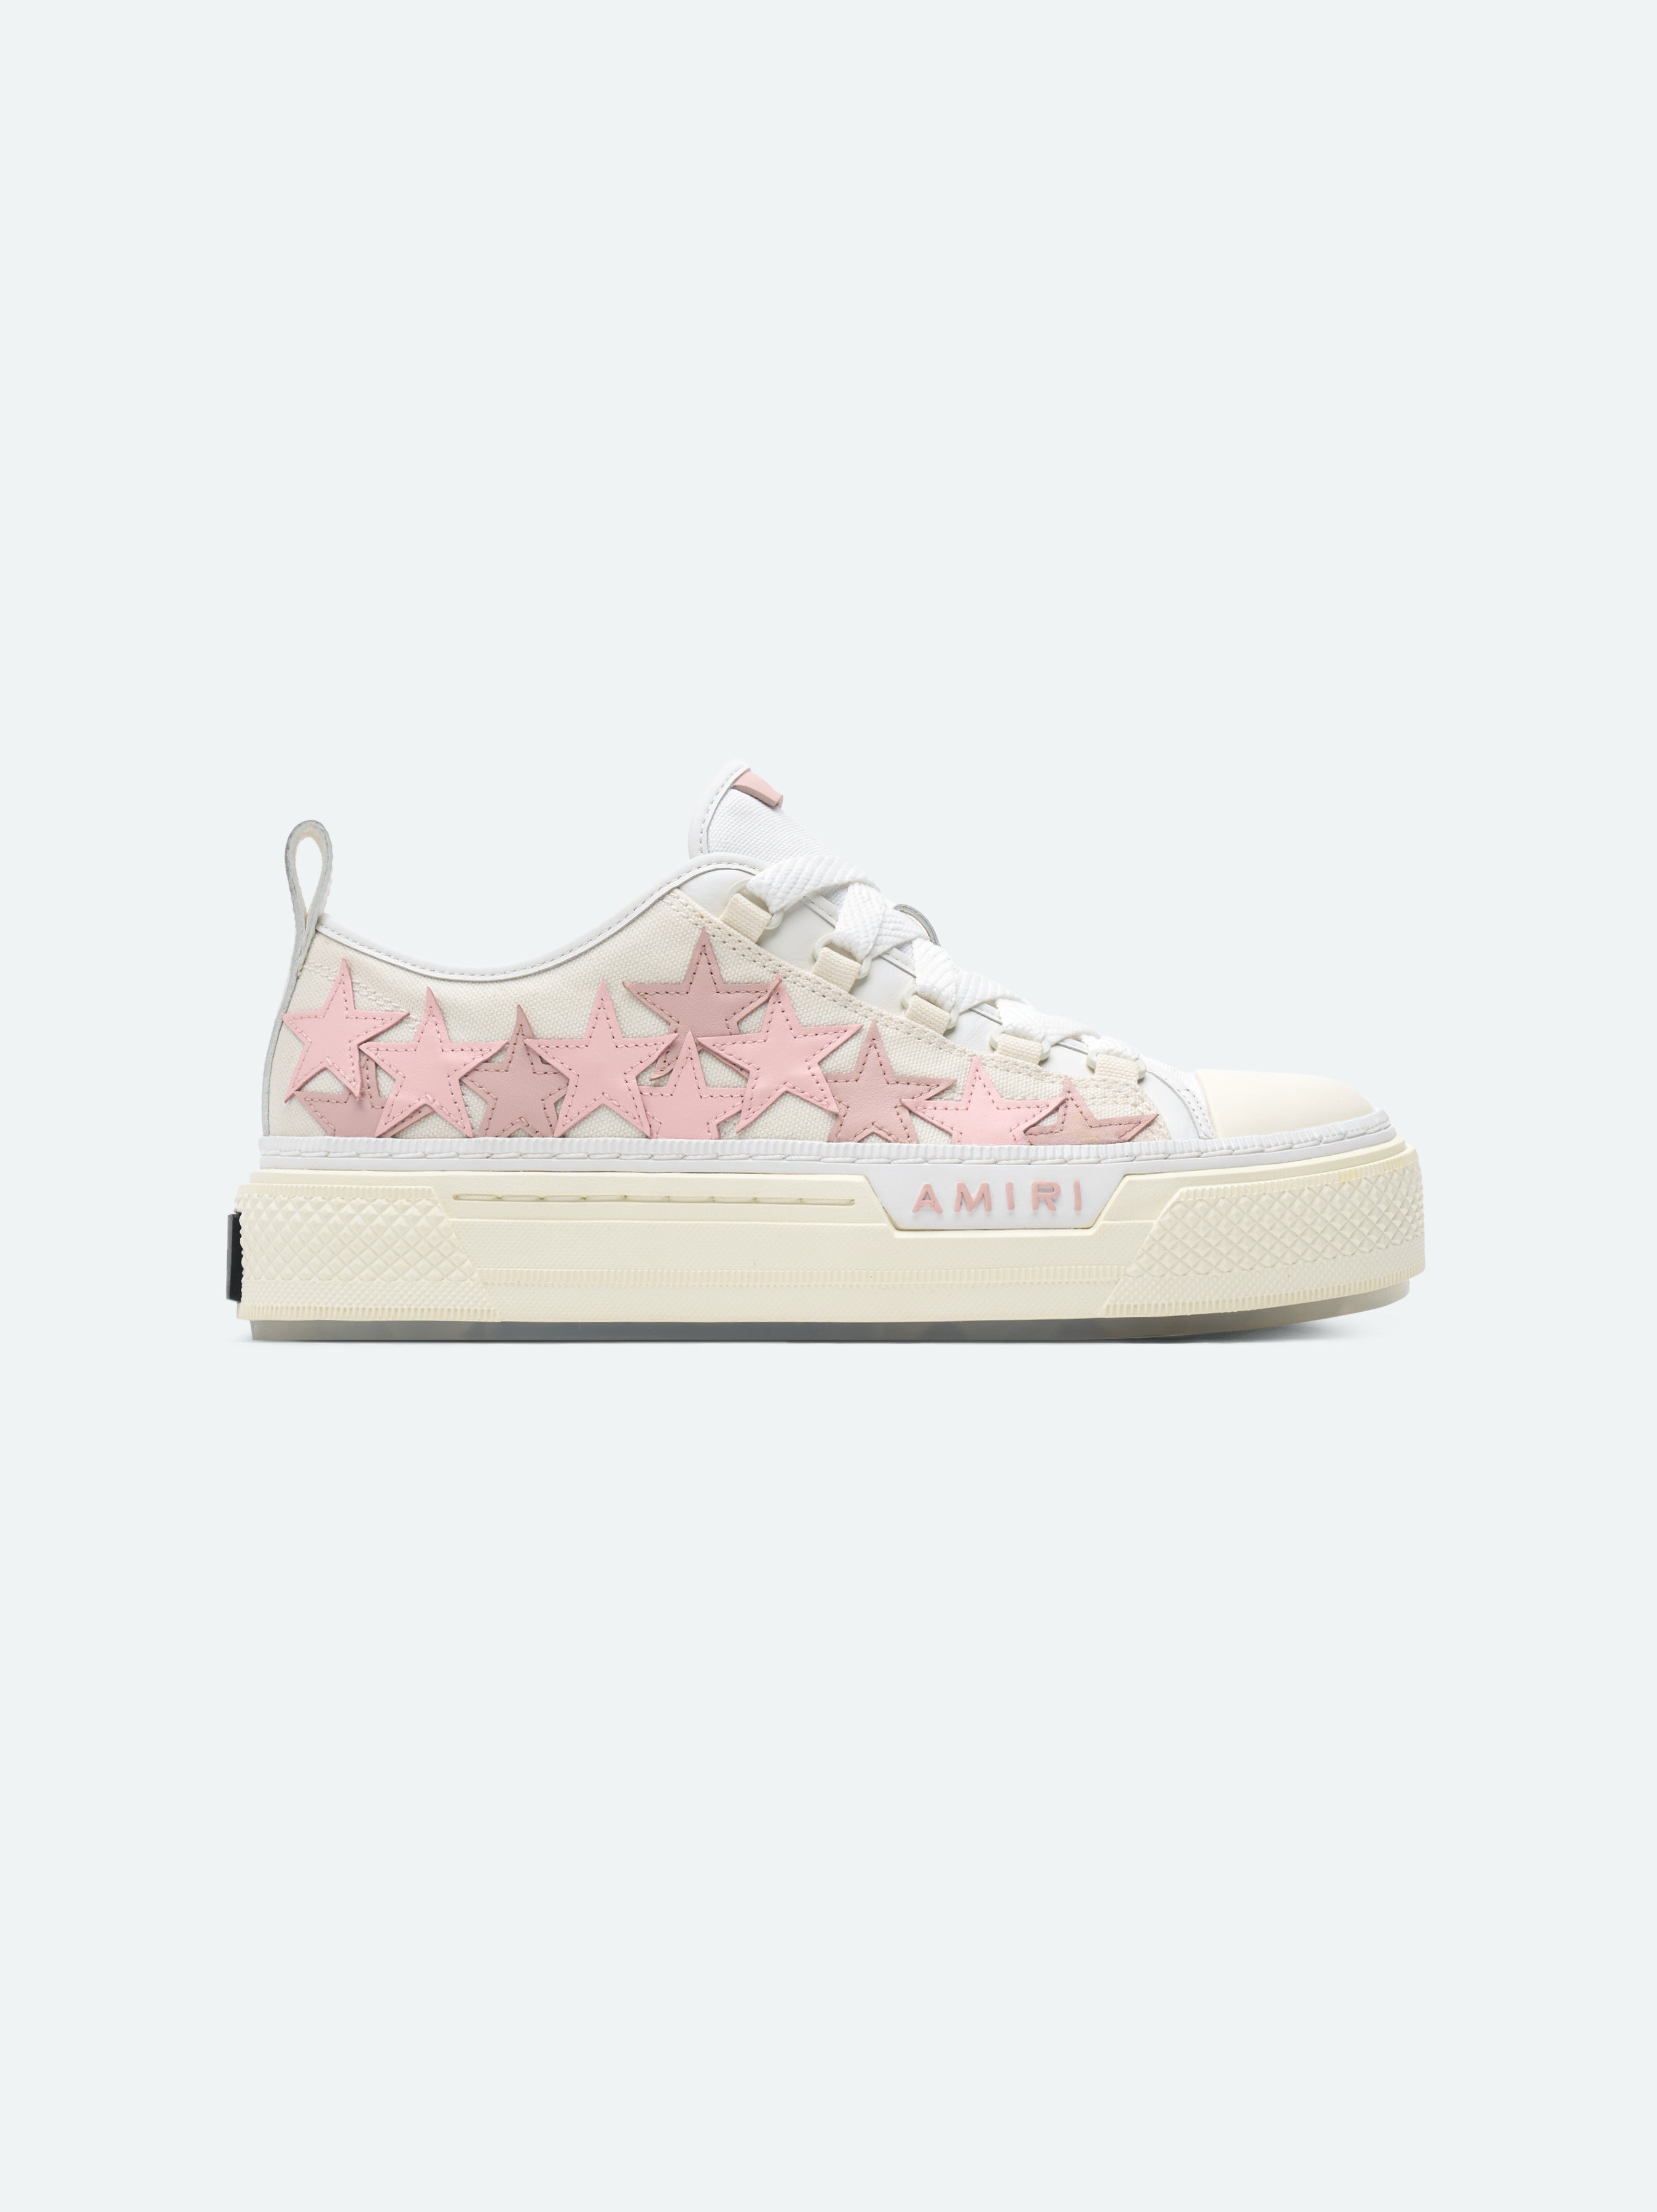 Product WOMEN - STARS COURT LOW - WHITE/PINK featured image